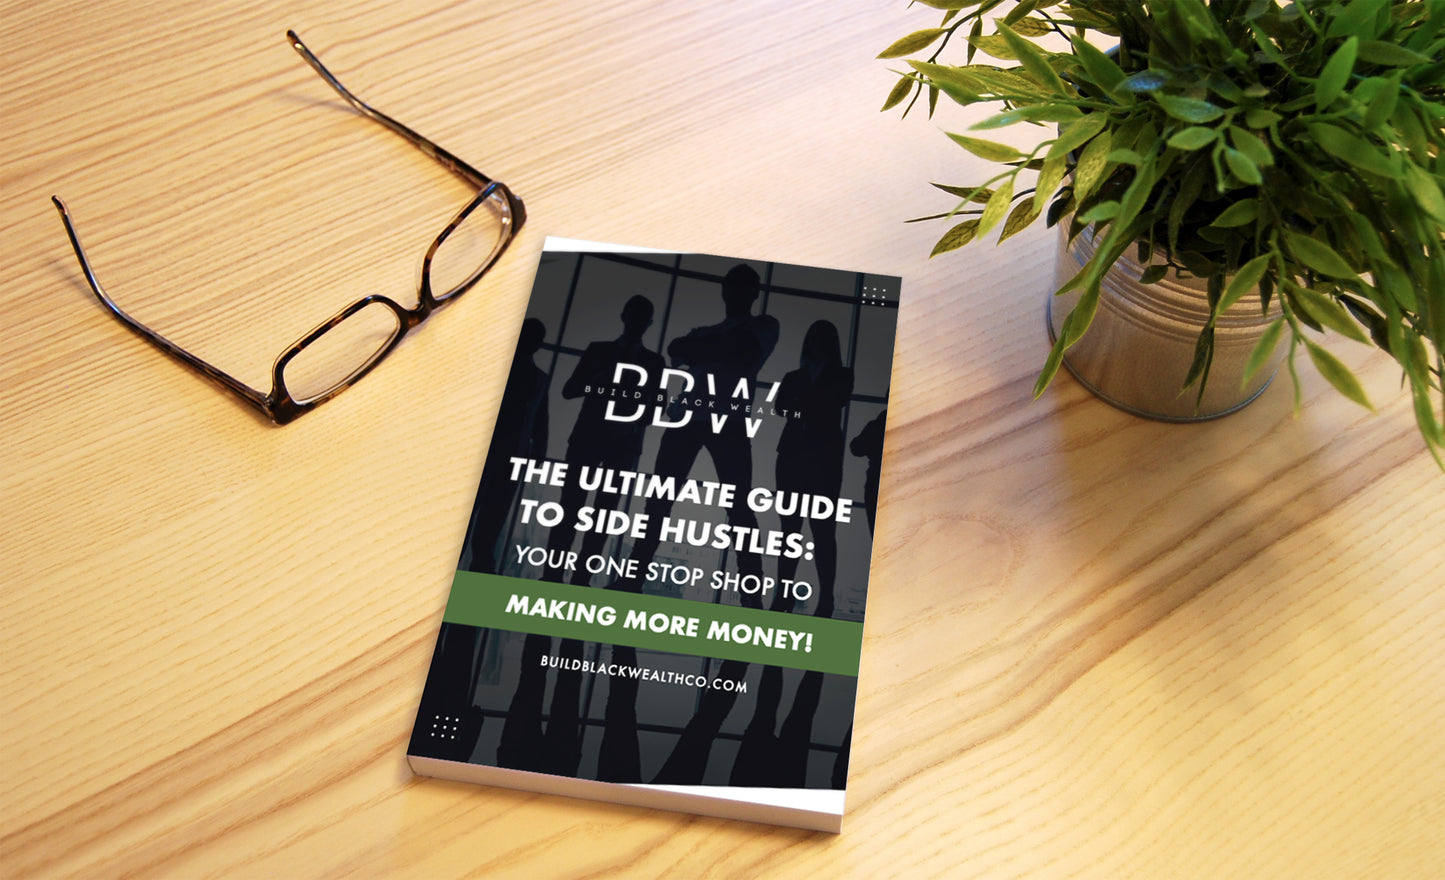 The Ultimate Guide To Side Hustles: Your One Stop Shop To Making More Money!